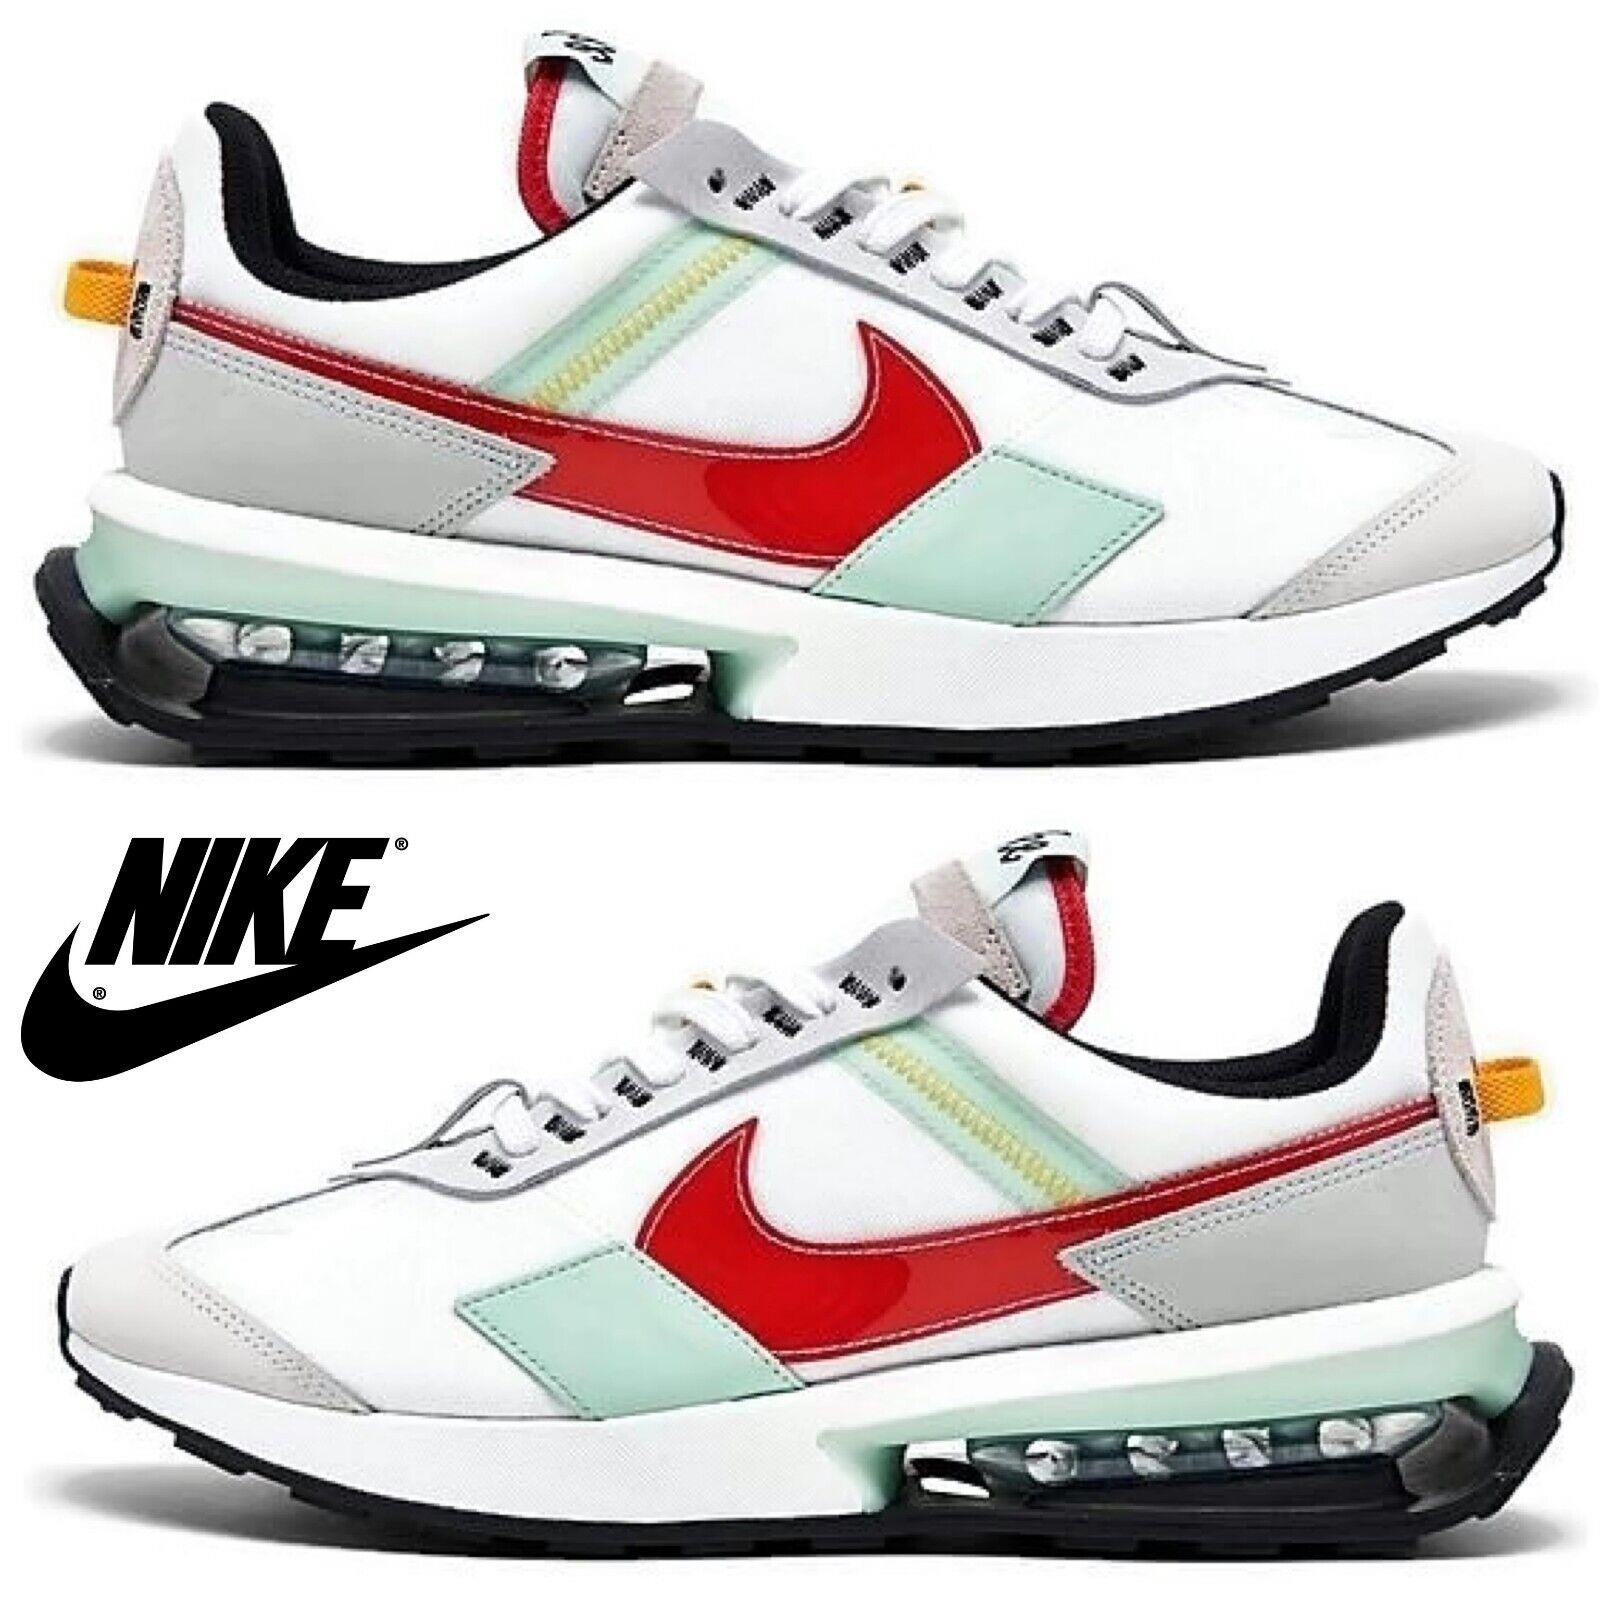 Nike Air Max Pre-day Men`s Sneakers Comfort Casual Sport Shoes Smoke White - White , Summit White/Mint Foam/Black/University Red Manufacturer